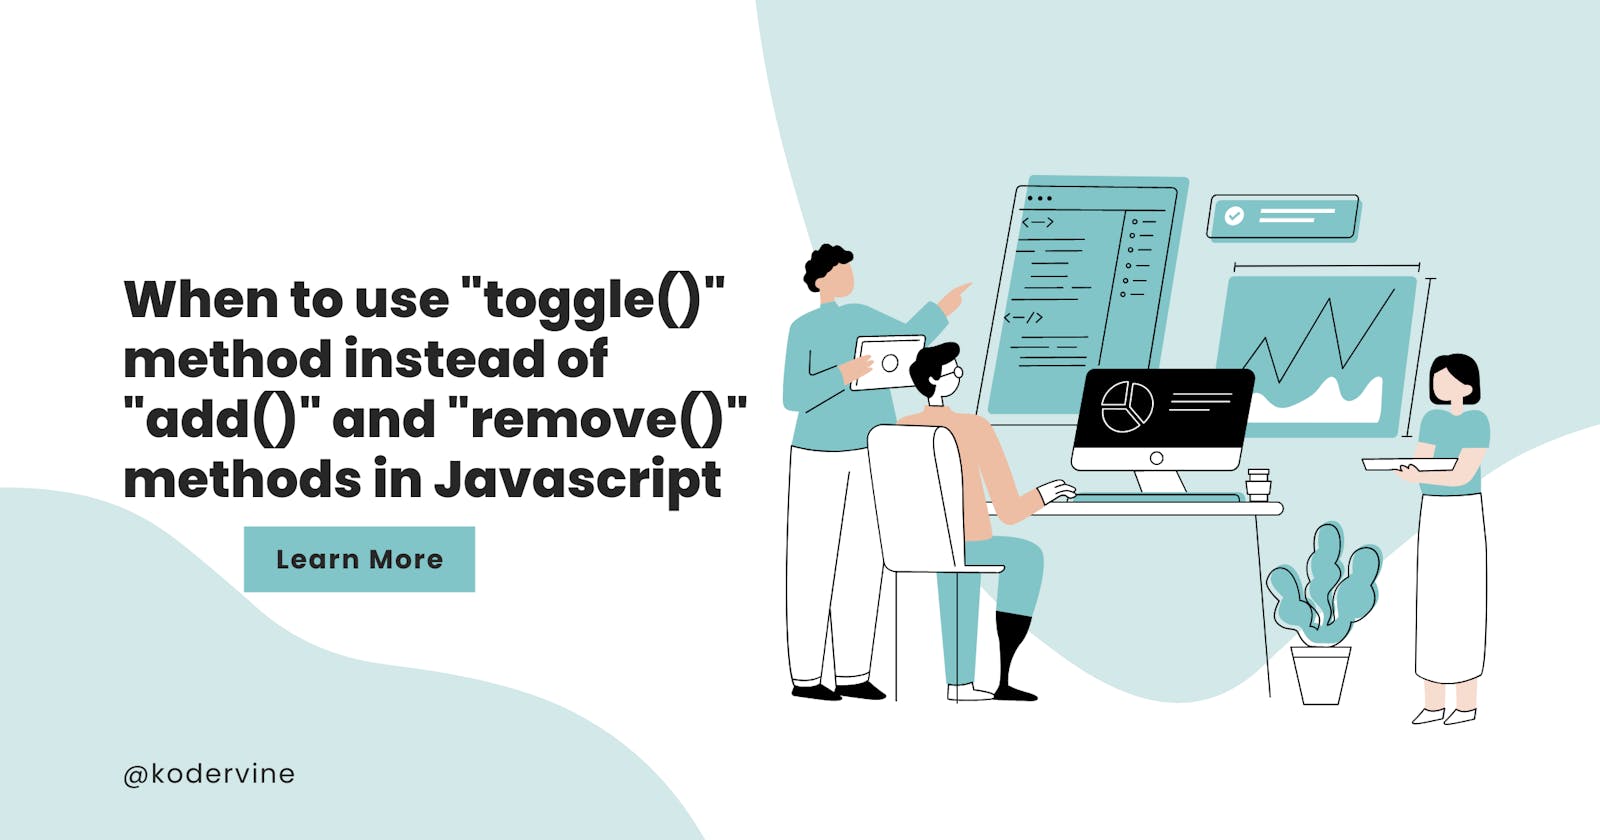 When to use "toggle()" method instead of "add()" and "remove()" methods in Javascript